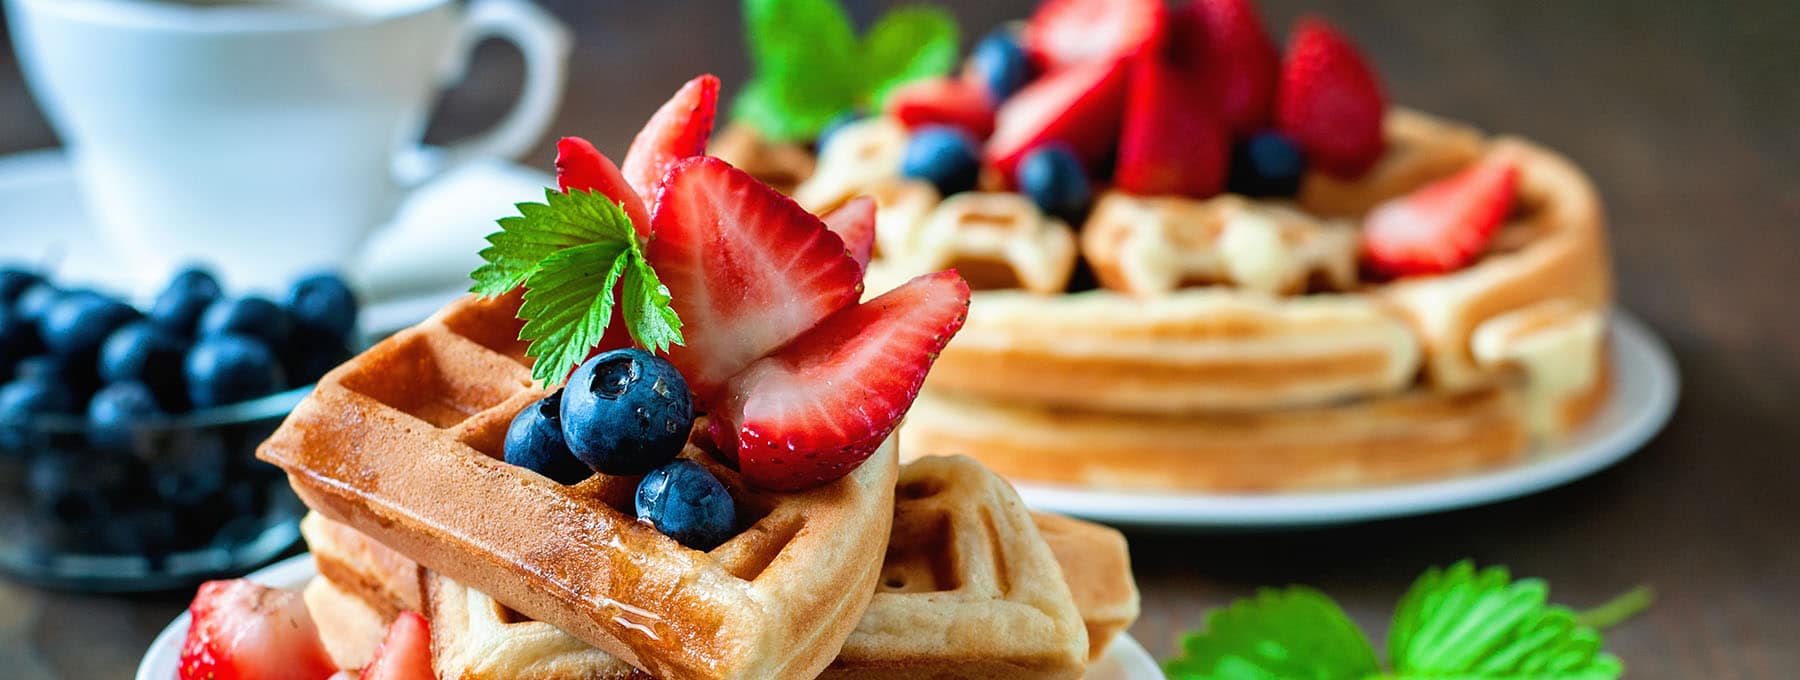 Waffles and fruit